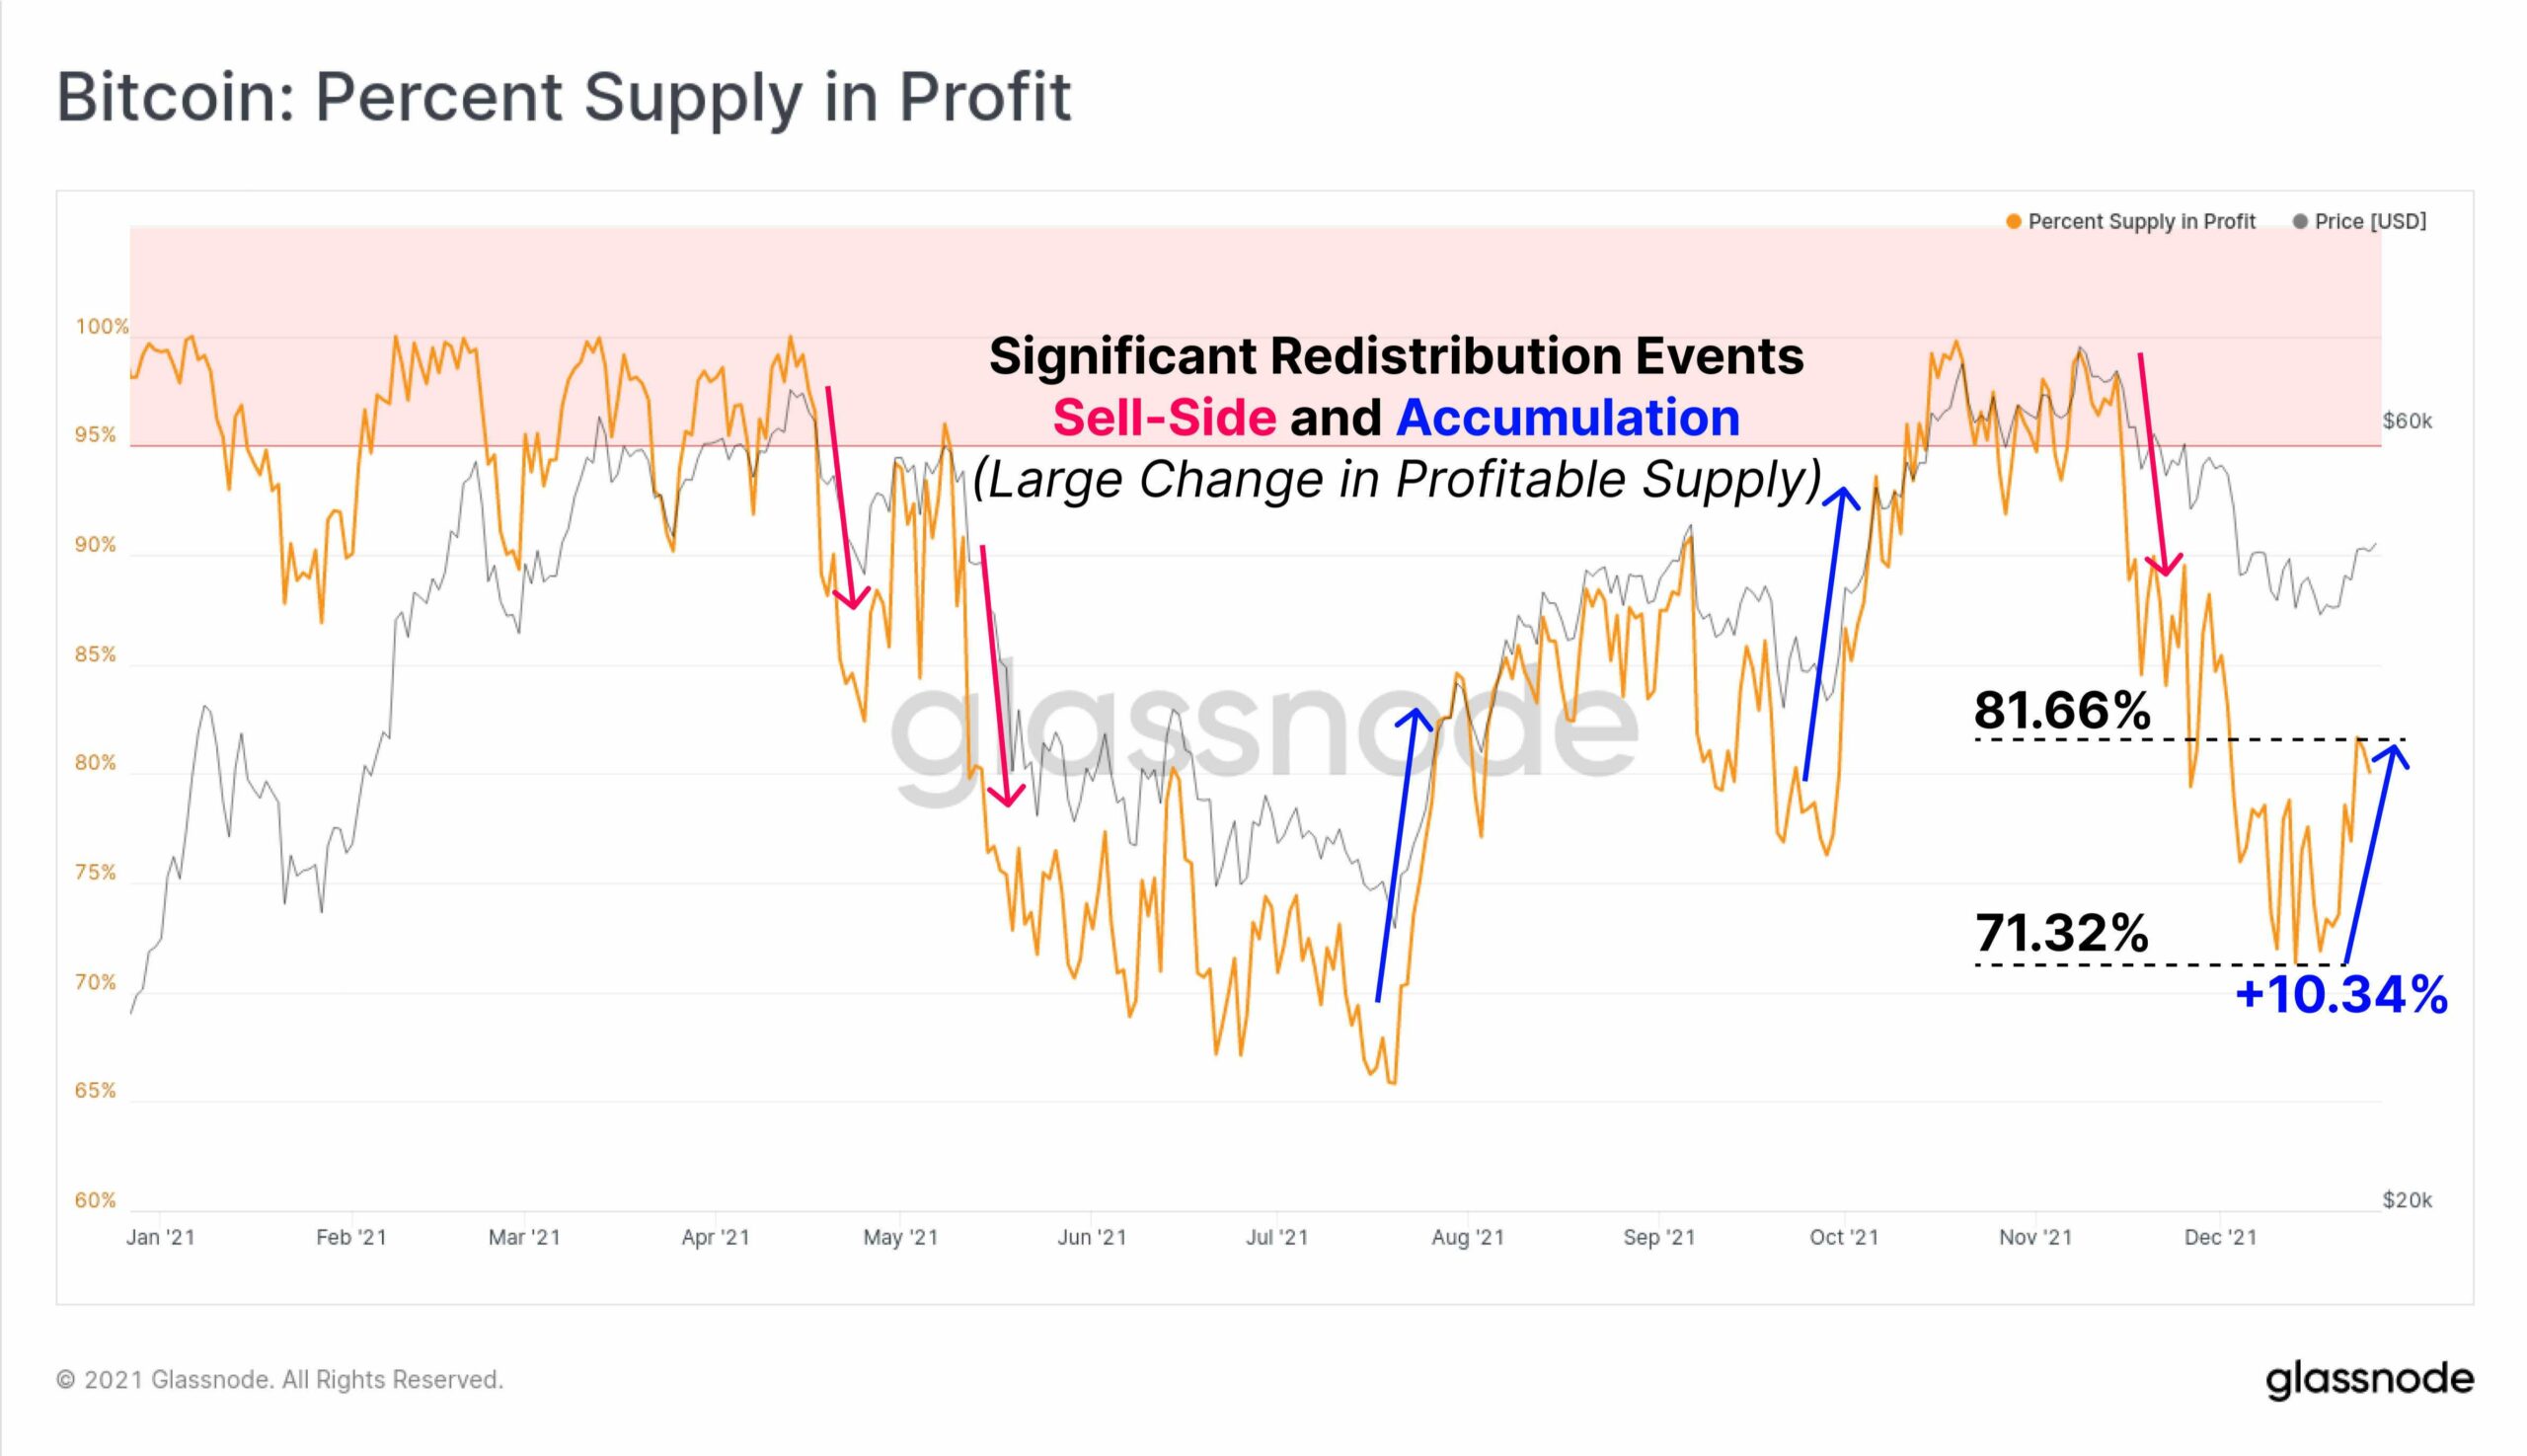 Bitcoin: Total Supply in Profit